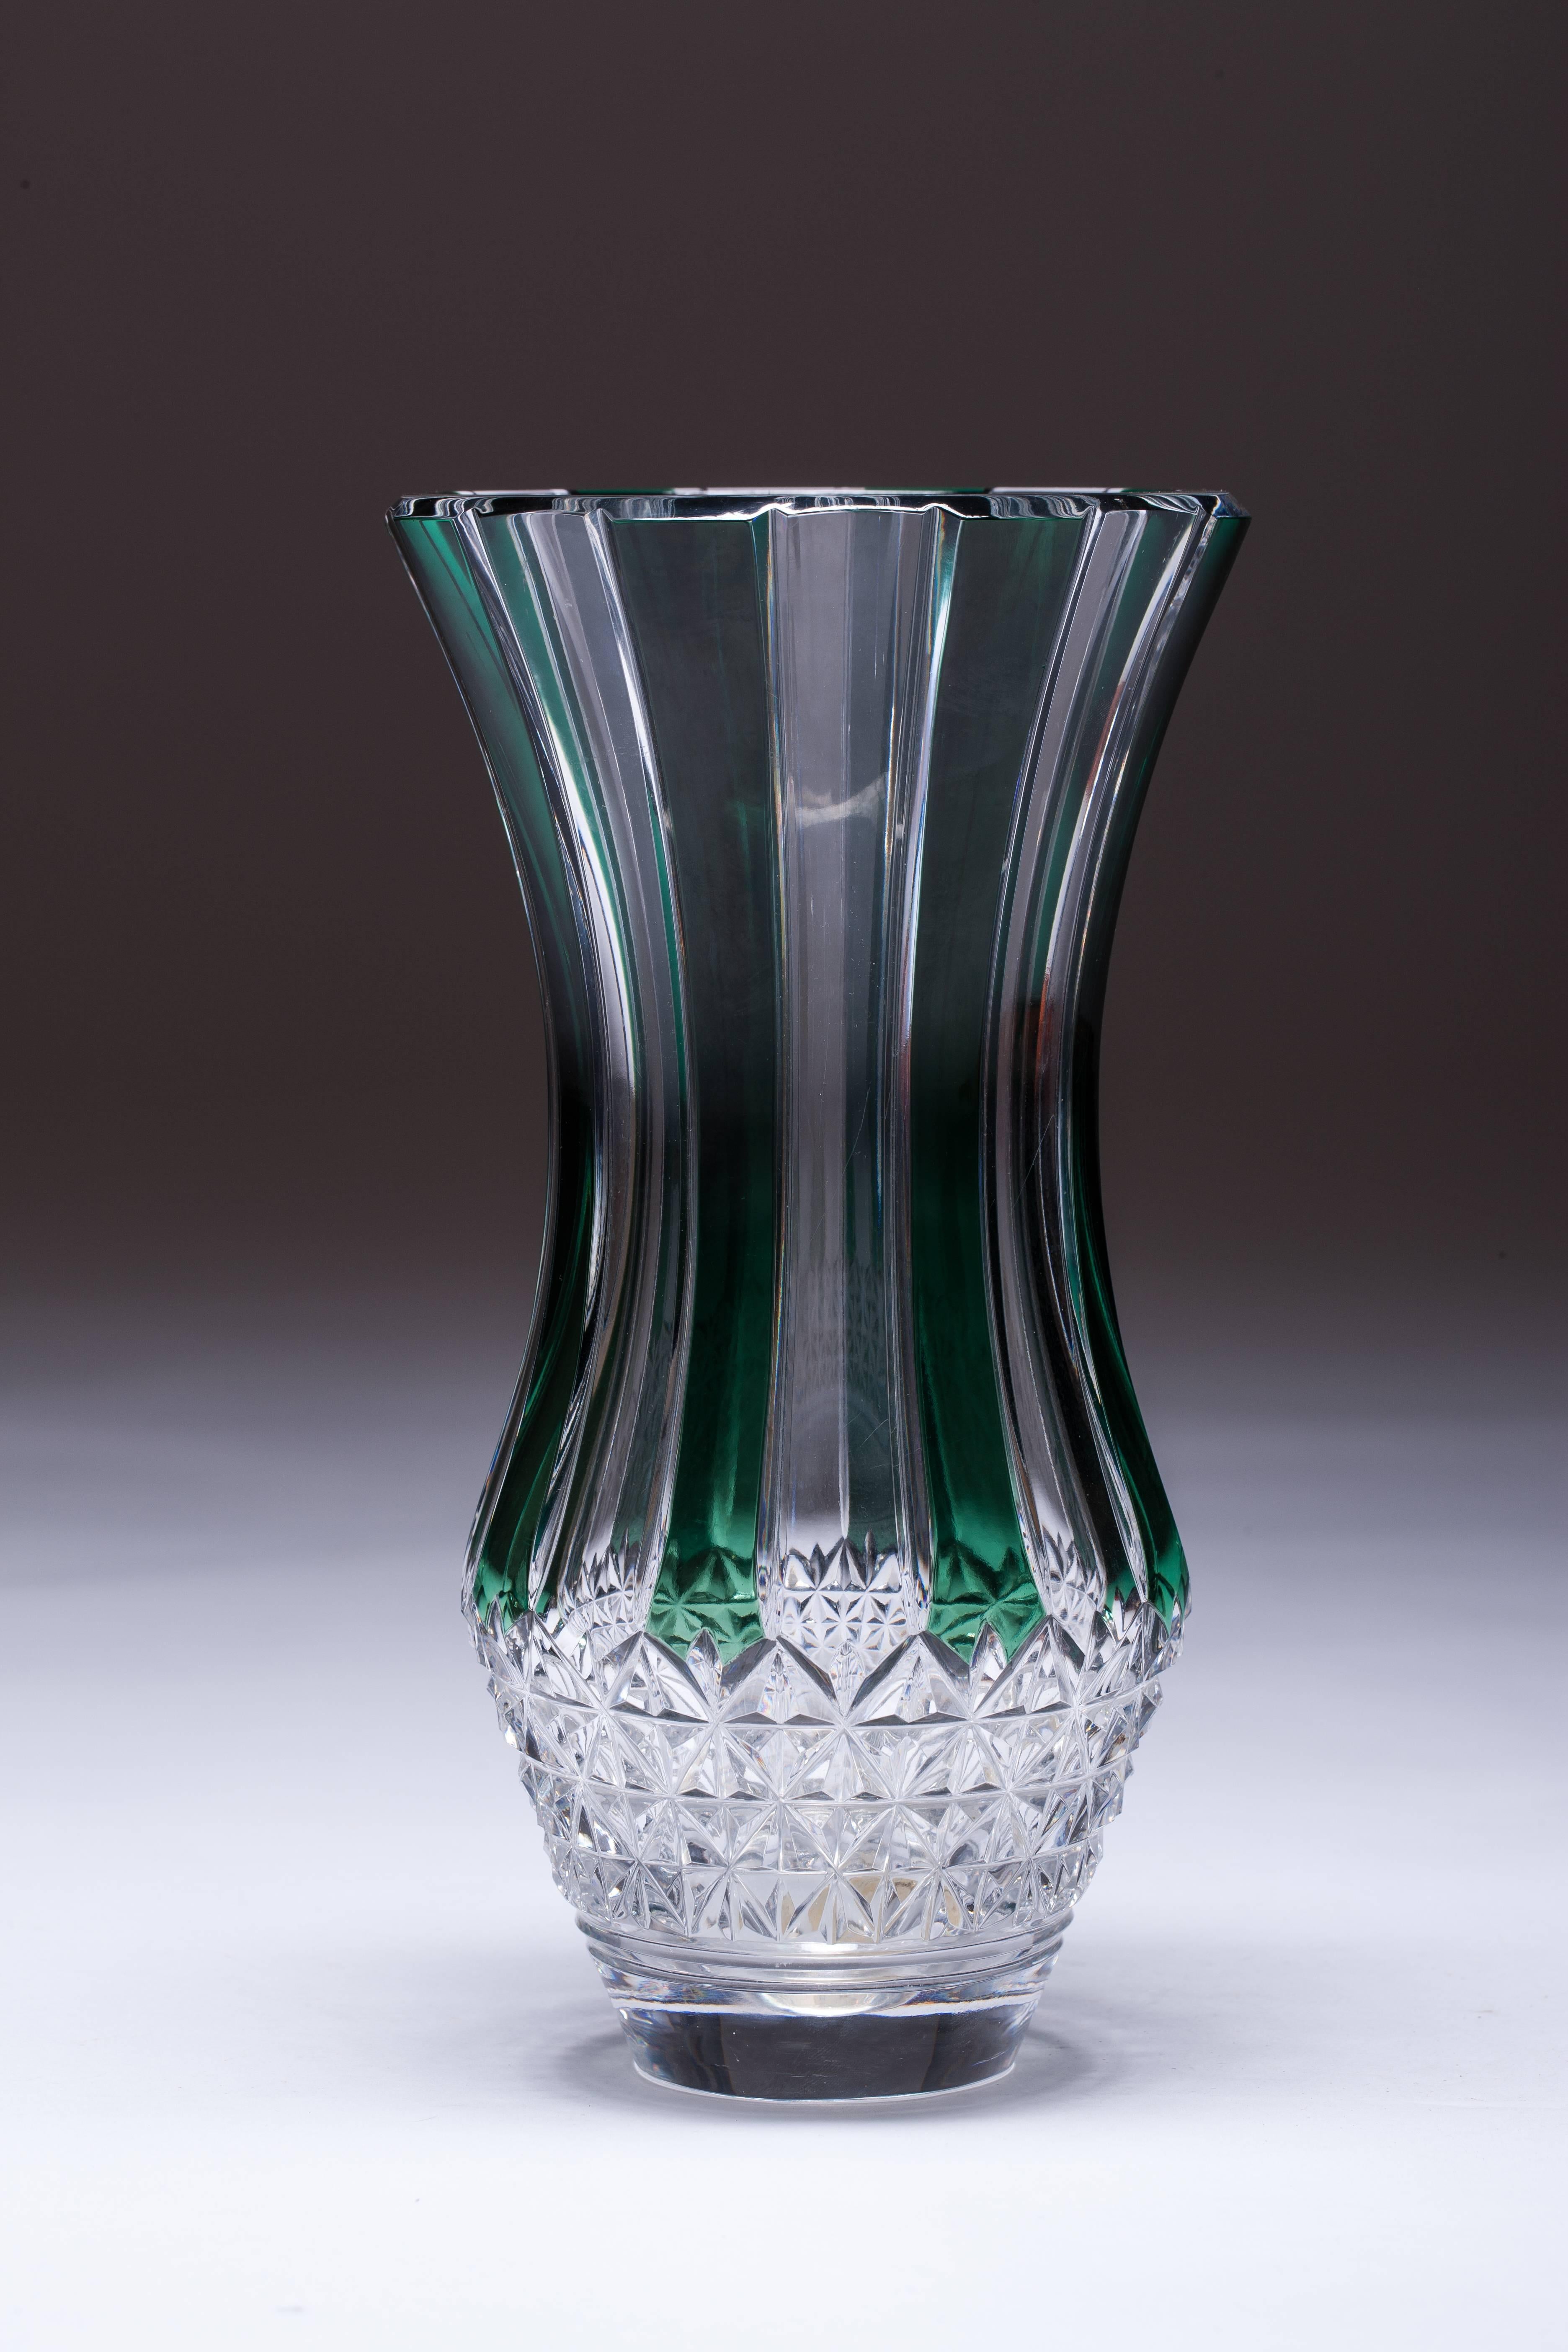 Green crystal handcrafted cut crystal glass vase.

Val St. Lambert Cristalleries of Belgium was founded by Messieurs Kemlin and Lelievre in 1825. The company is still in operation. All types of table glassware and decorative glassware have been